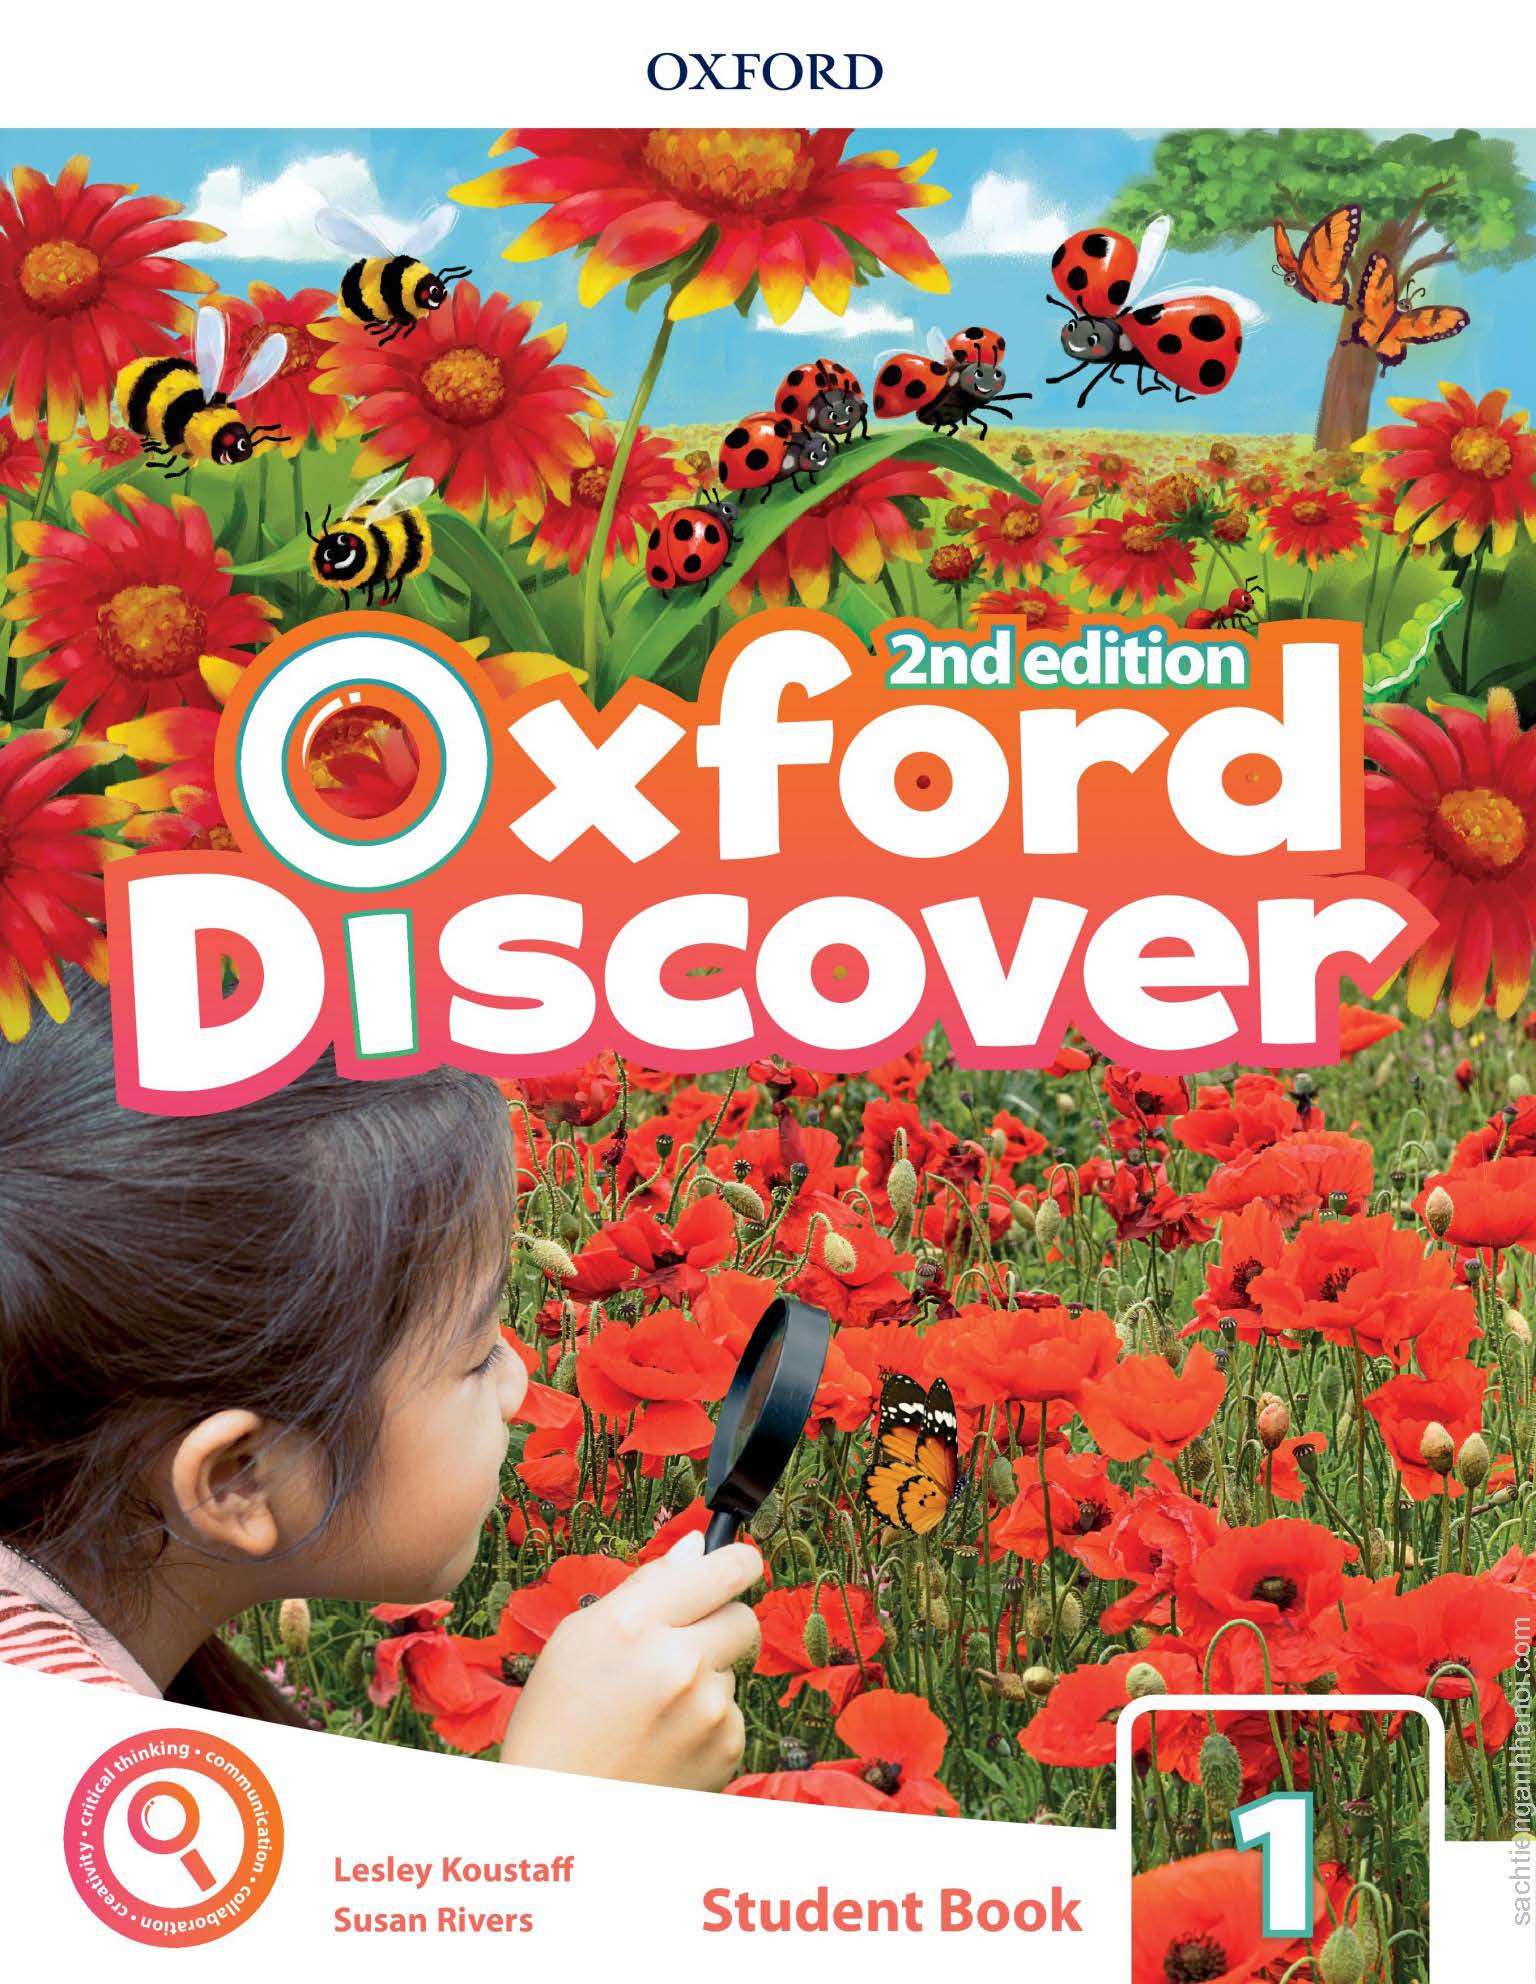 Discover students book. Oxford discover 1. Oxford discover 1 (student’s book, Workbook). Oxford discover 2nd Edition. Oxford discover 2 Edition 2.